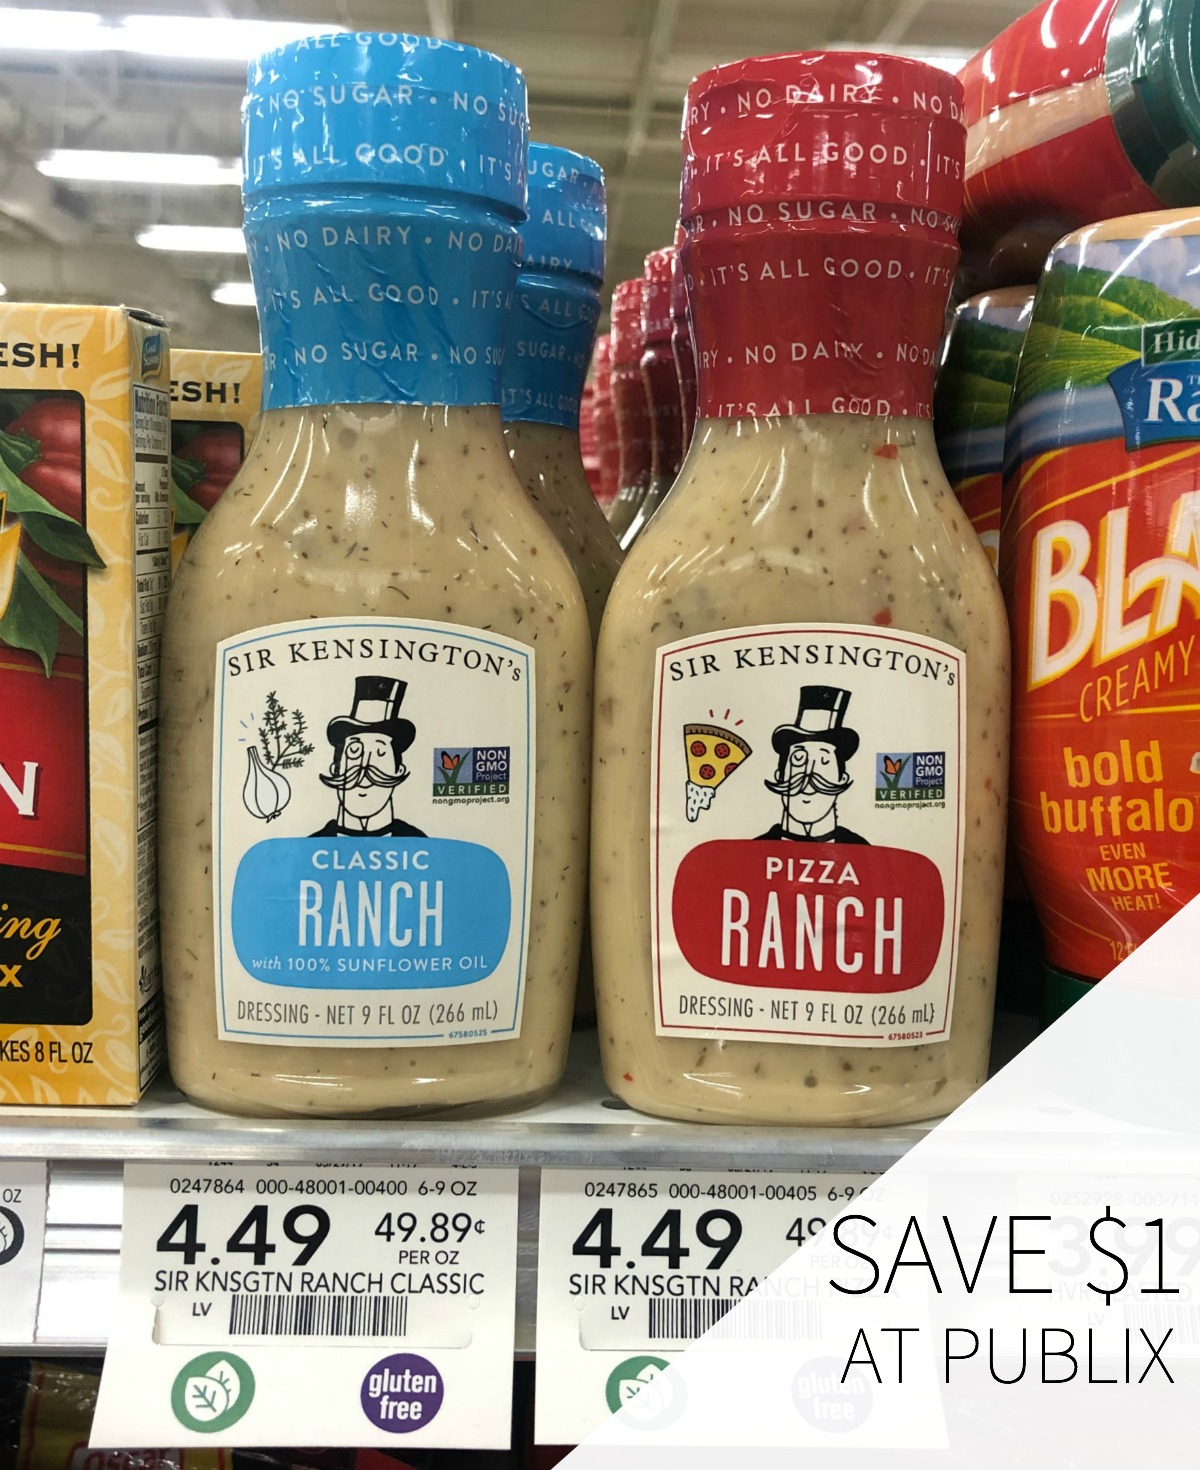 Find Sir Kensington’s At Publix & Save On Your Next Purchase on I Heart Publix